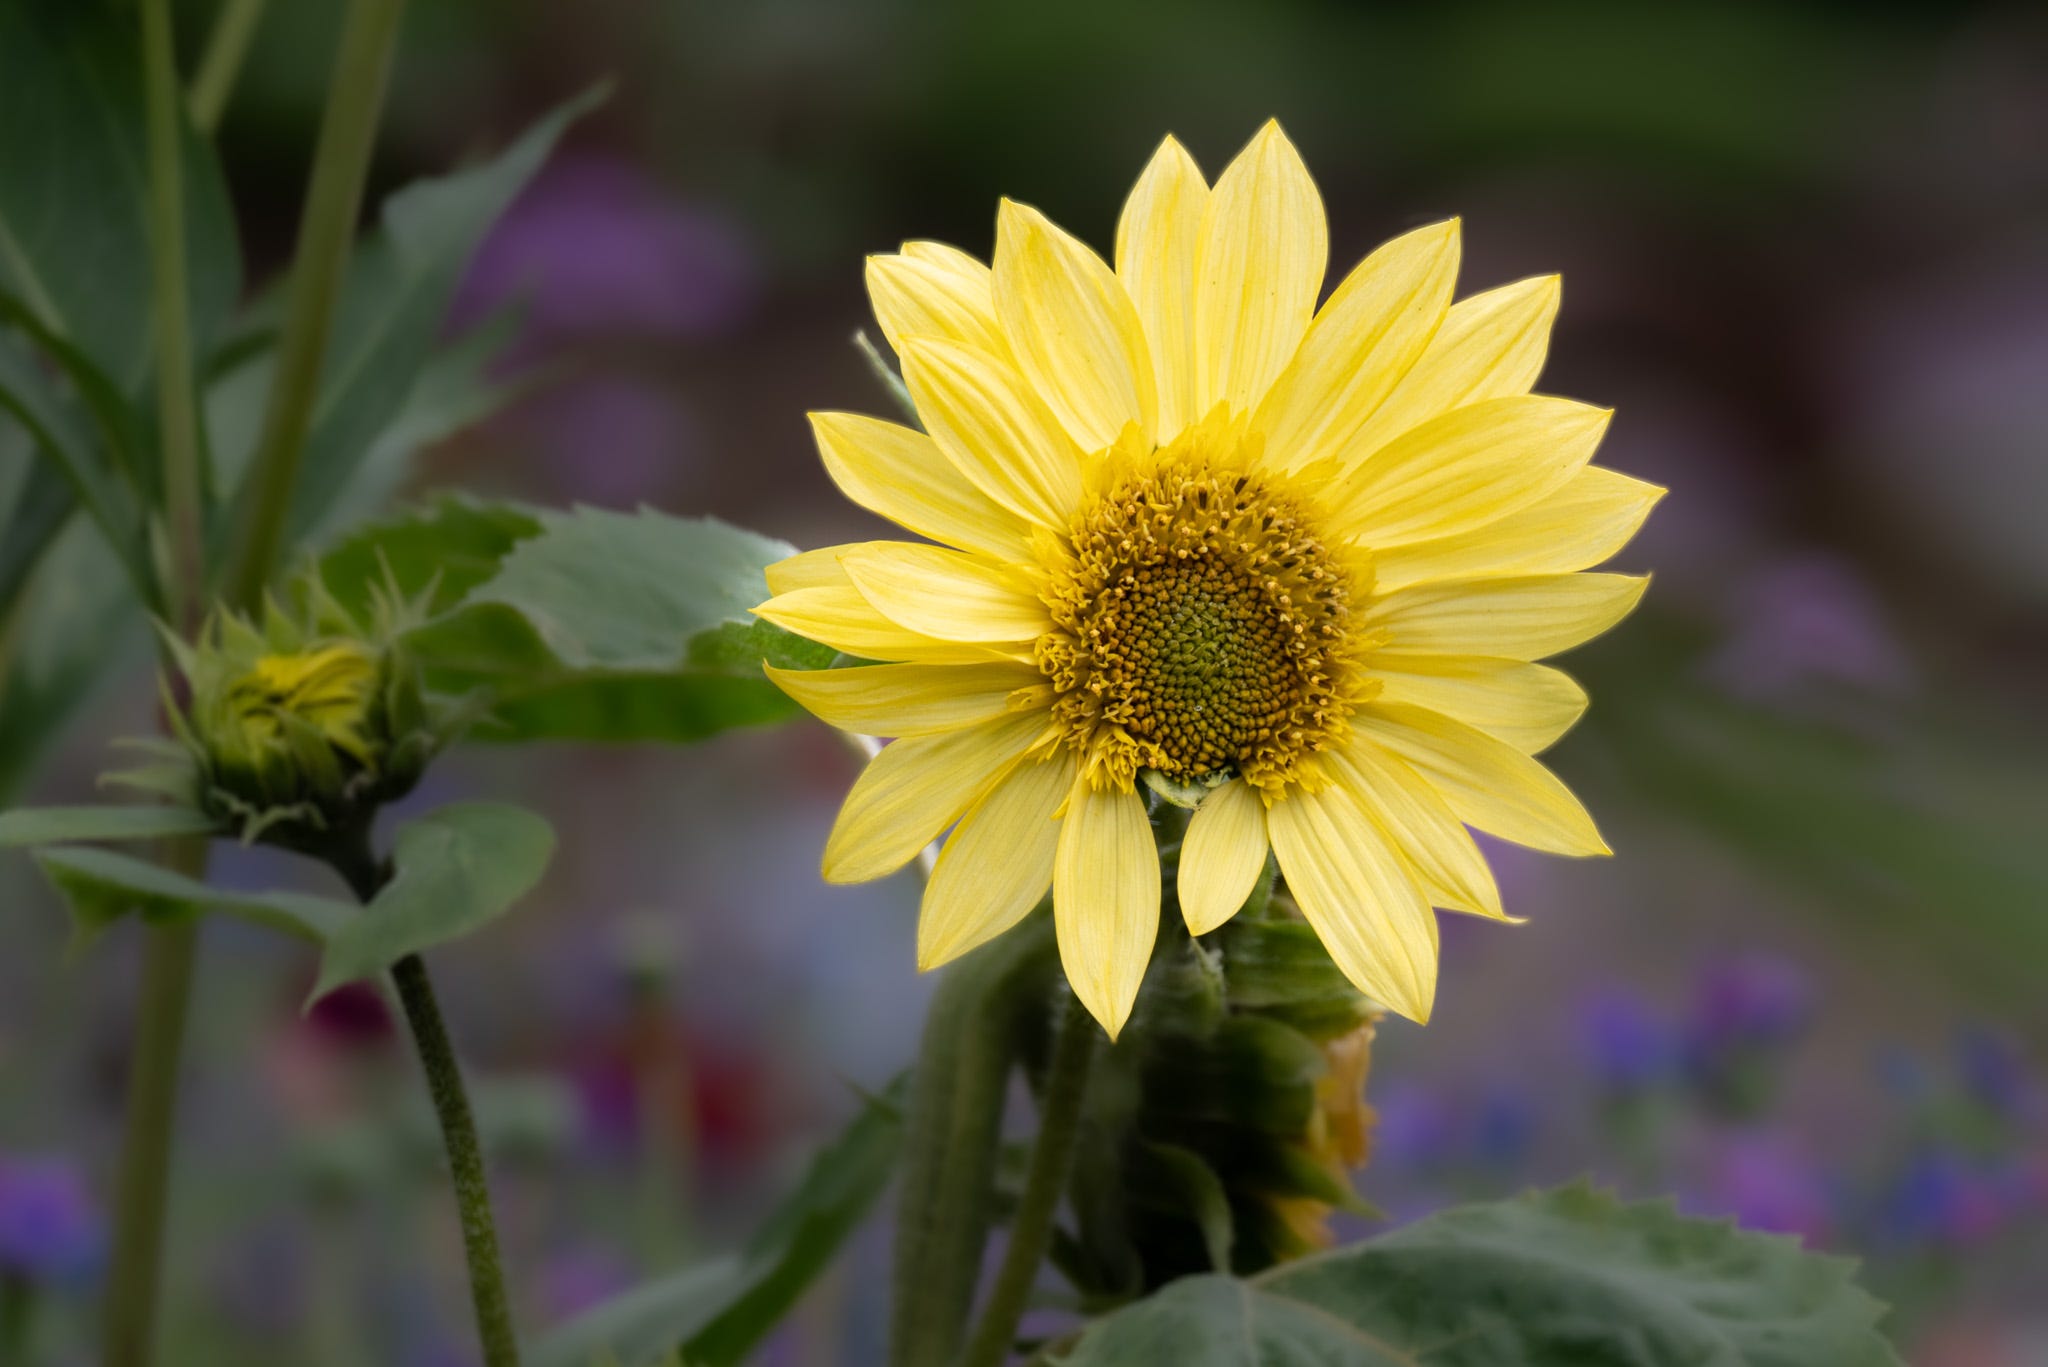 A single yellow sunflower with a yellow middle with a blurred background of the field